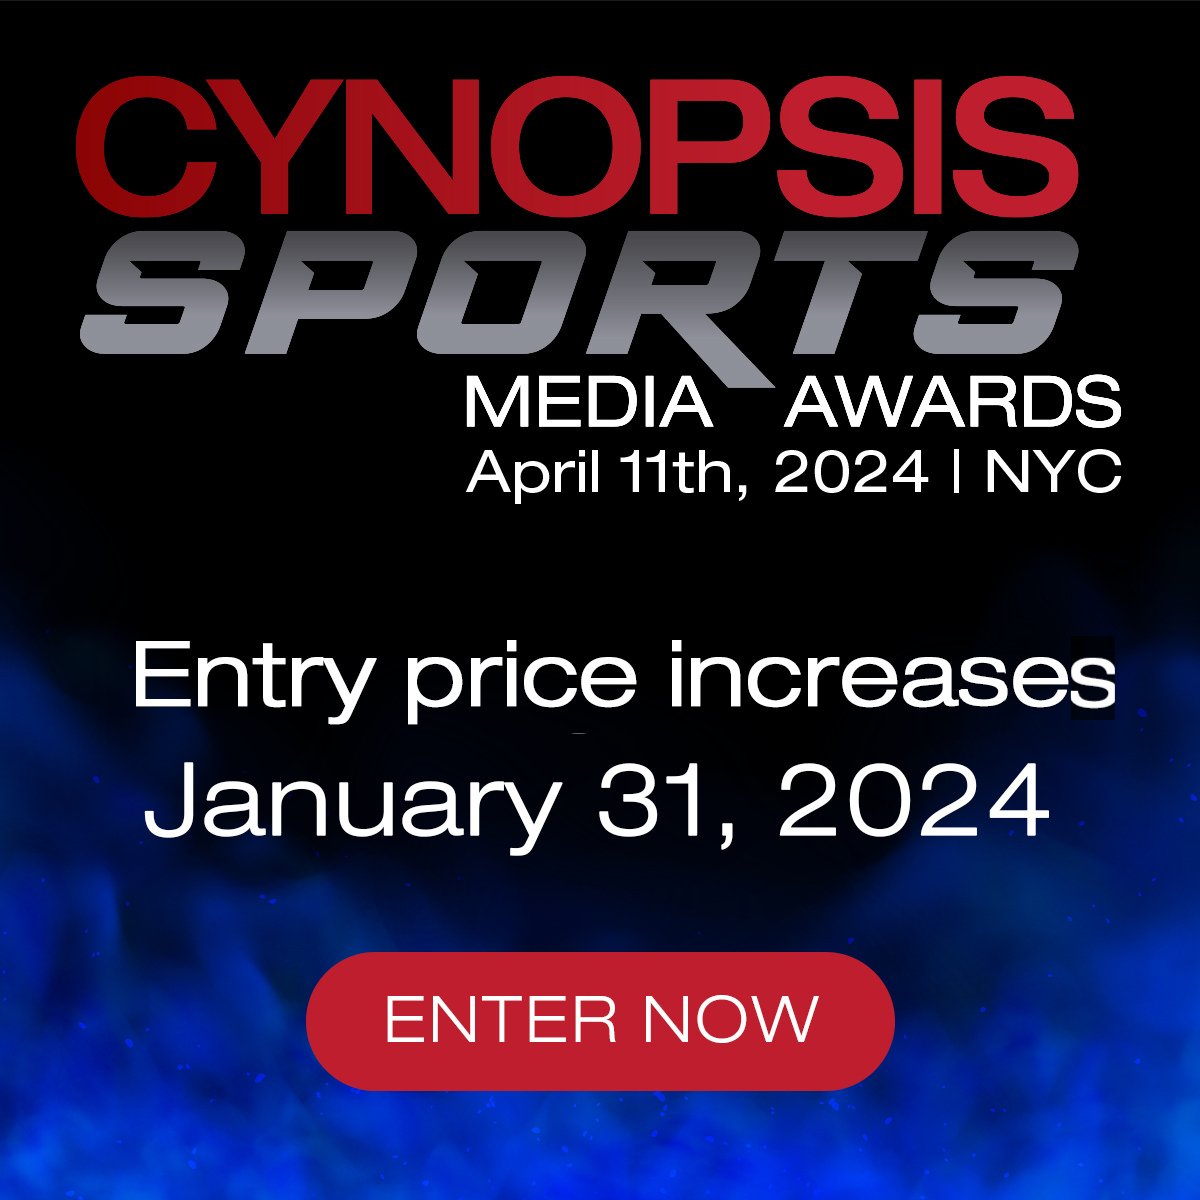 Time is running out! Secure your spot at the Cynopsis Sports Media Awards by entering today! Prices increase by $75 tonight at 11:59PM ET. Don't miss your chance to shine - enter now! cynopsis.com/events/2024-sp…